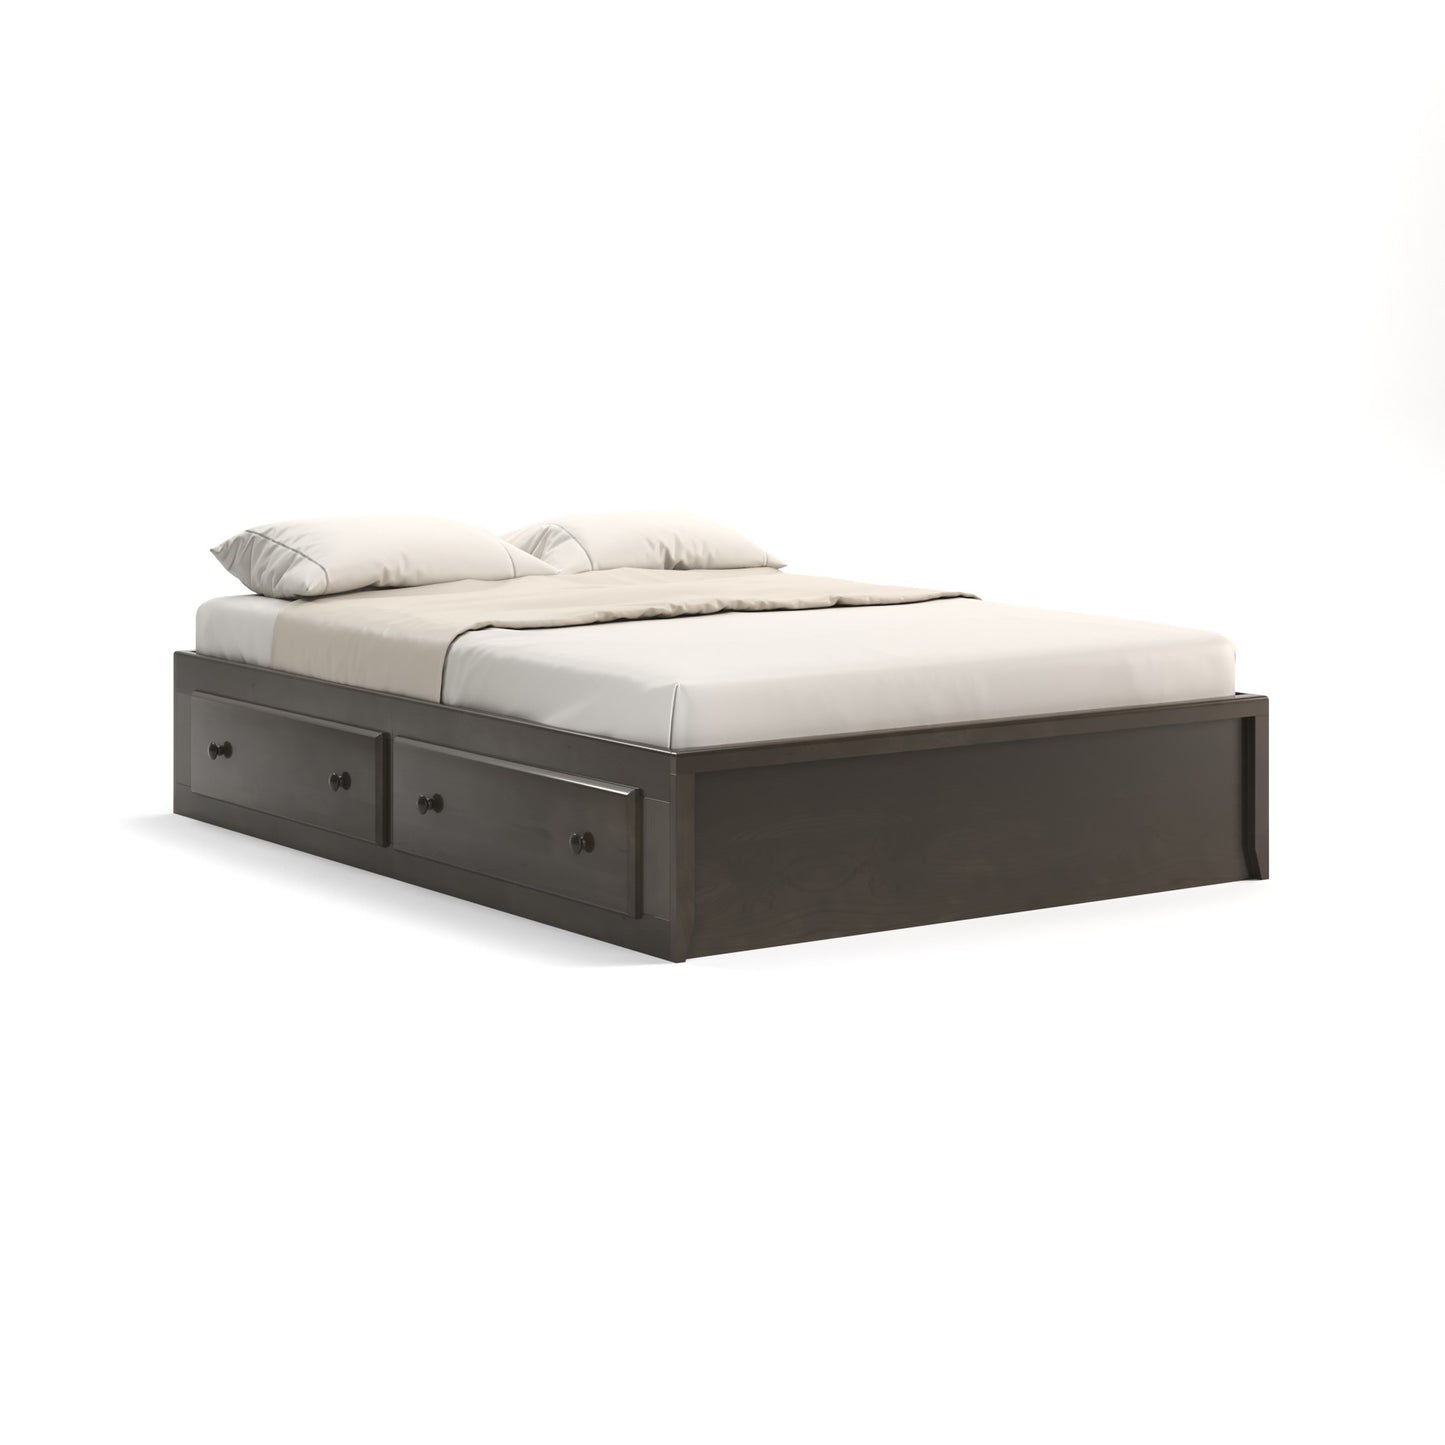 Acadia Shaker Storage Bed with Four Drawers, featuring two drawers on both sides. Pictured in Nitefall finish.